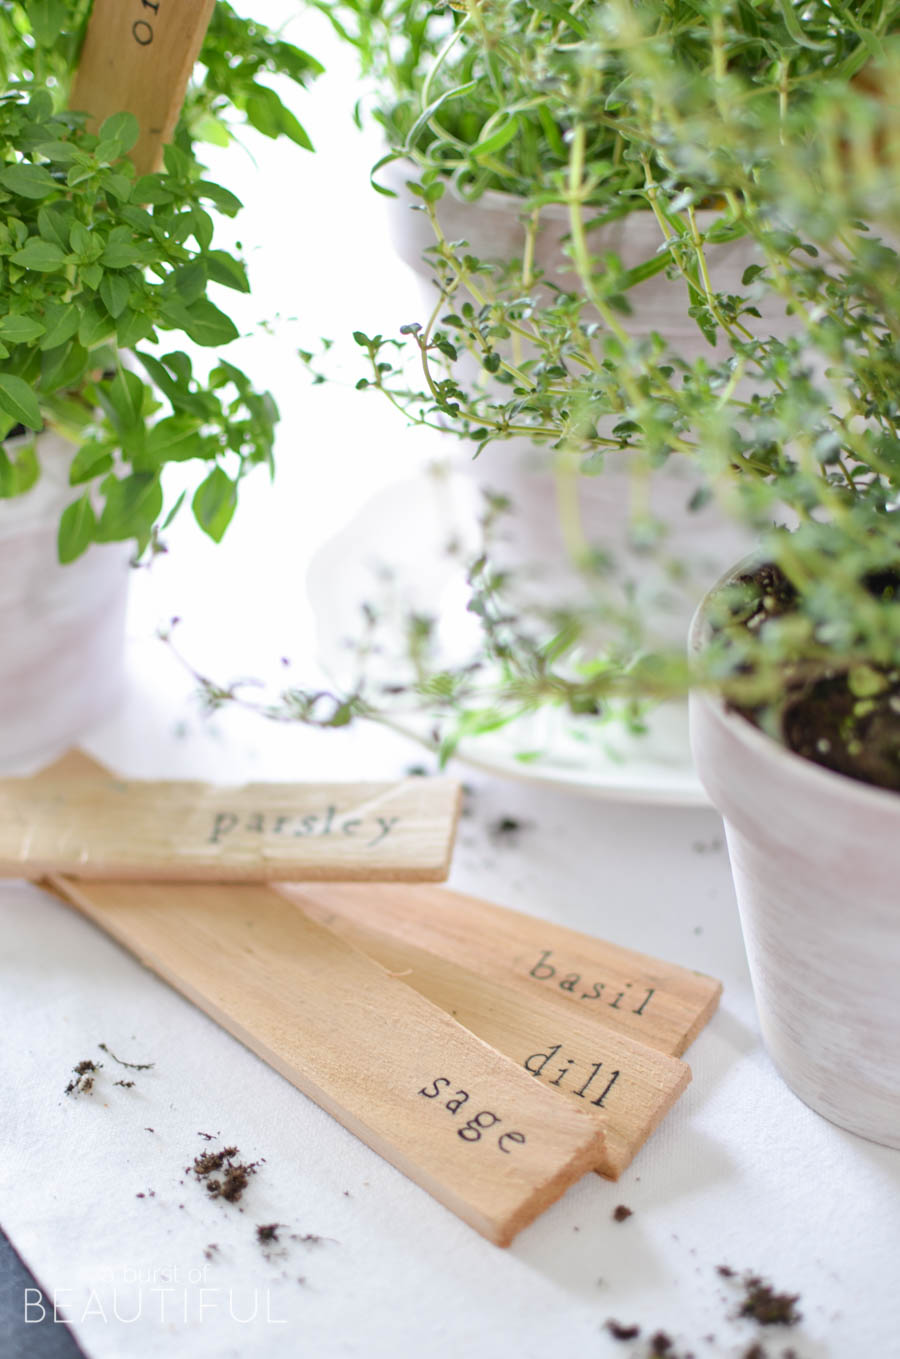 Simple DIY herb markers add a little extra charm to potted fresh herbs | A Burst of Beautiful 